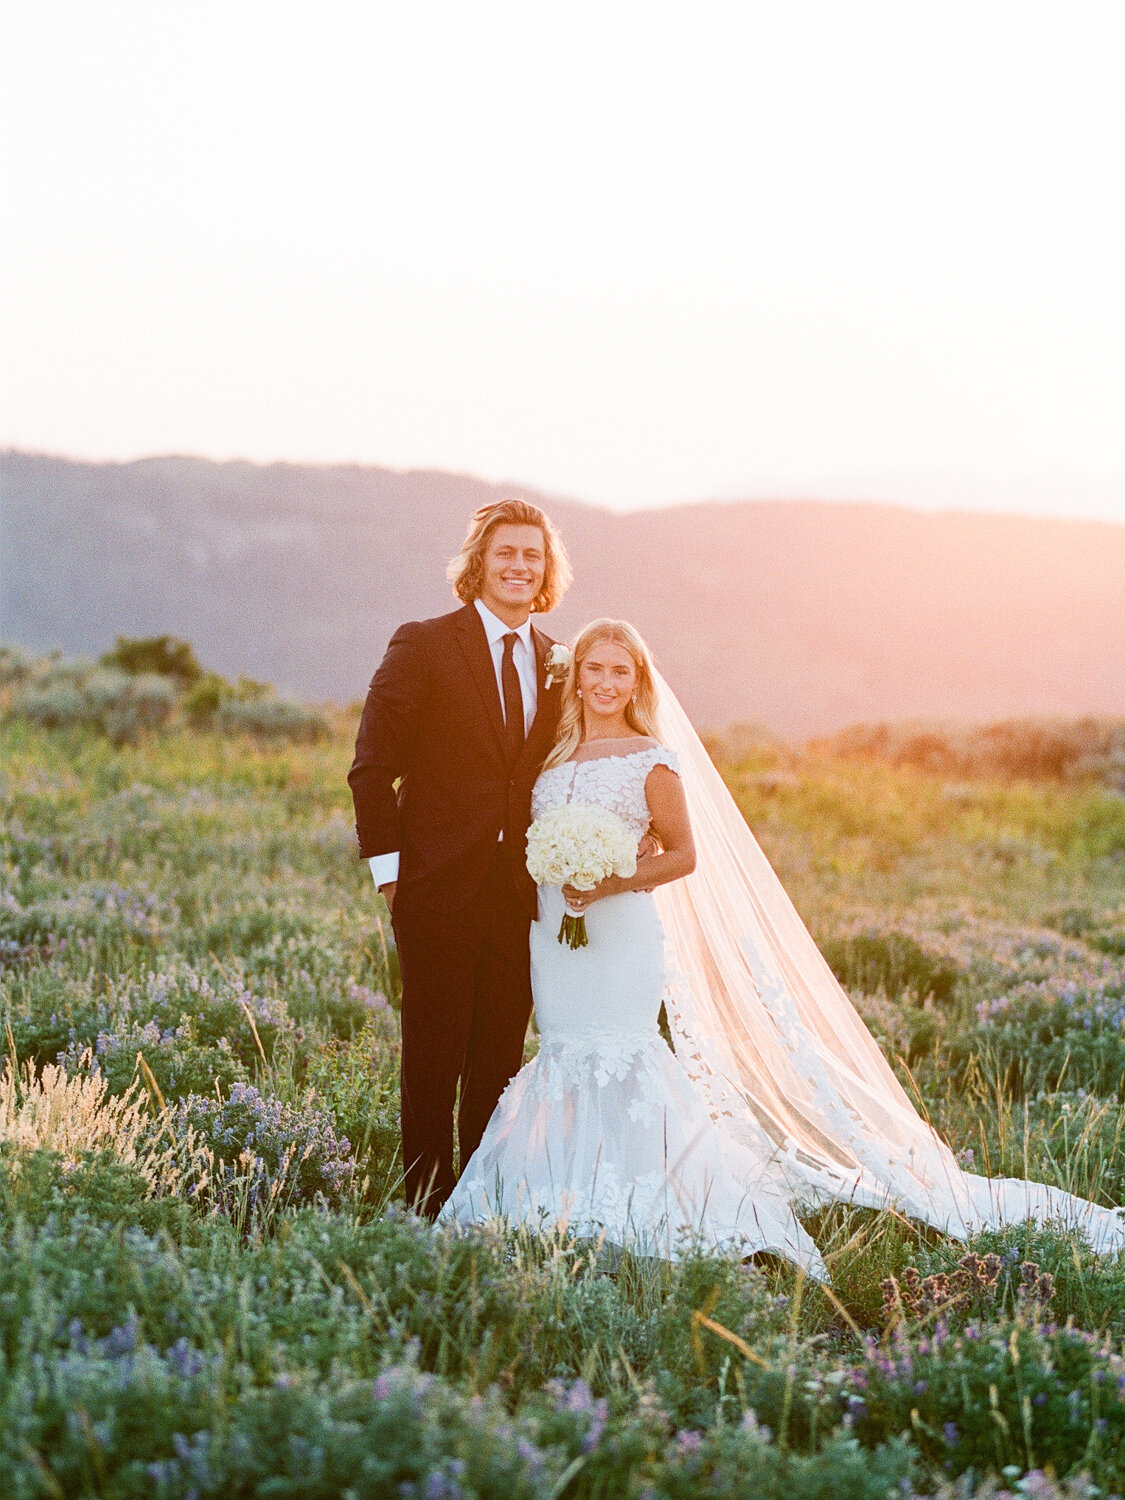 bride and groom portrait at sunset in mountains